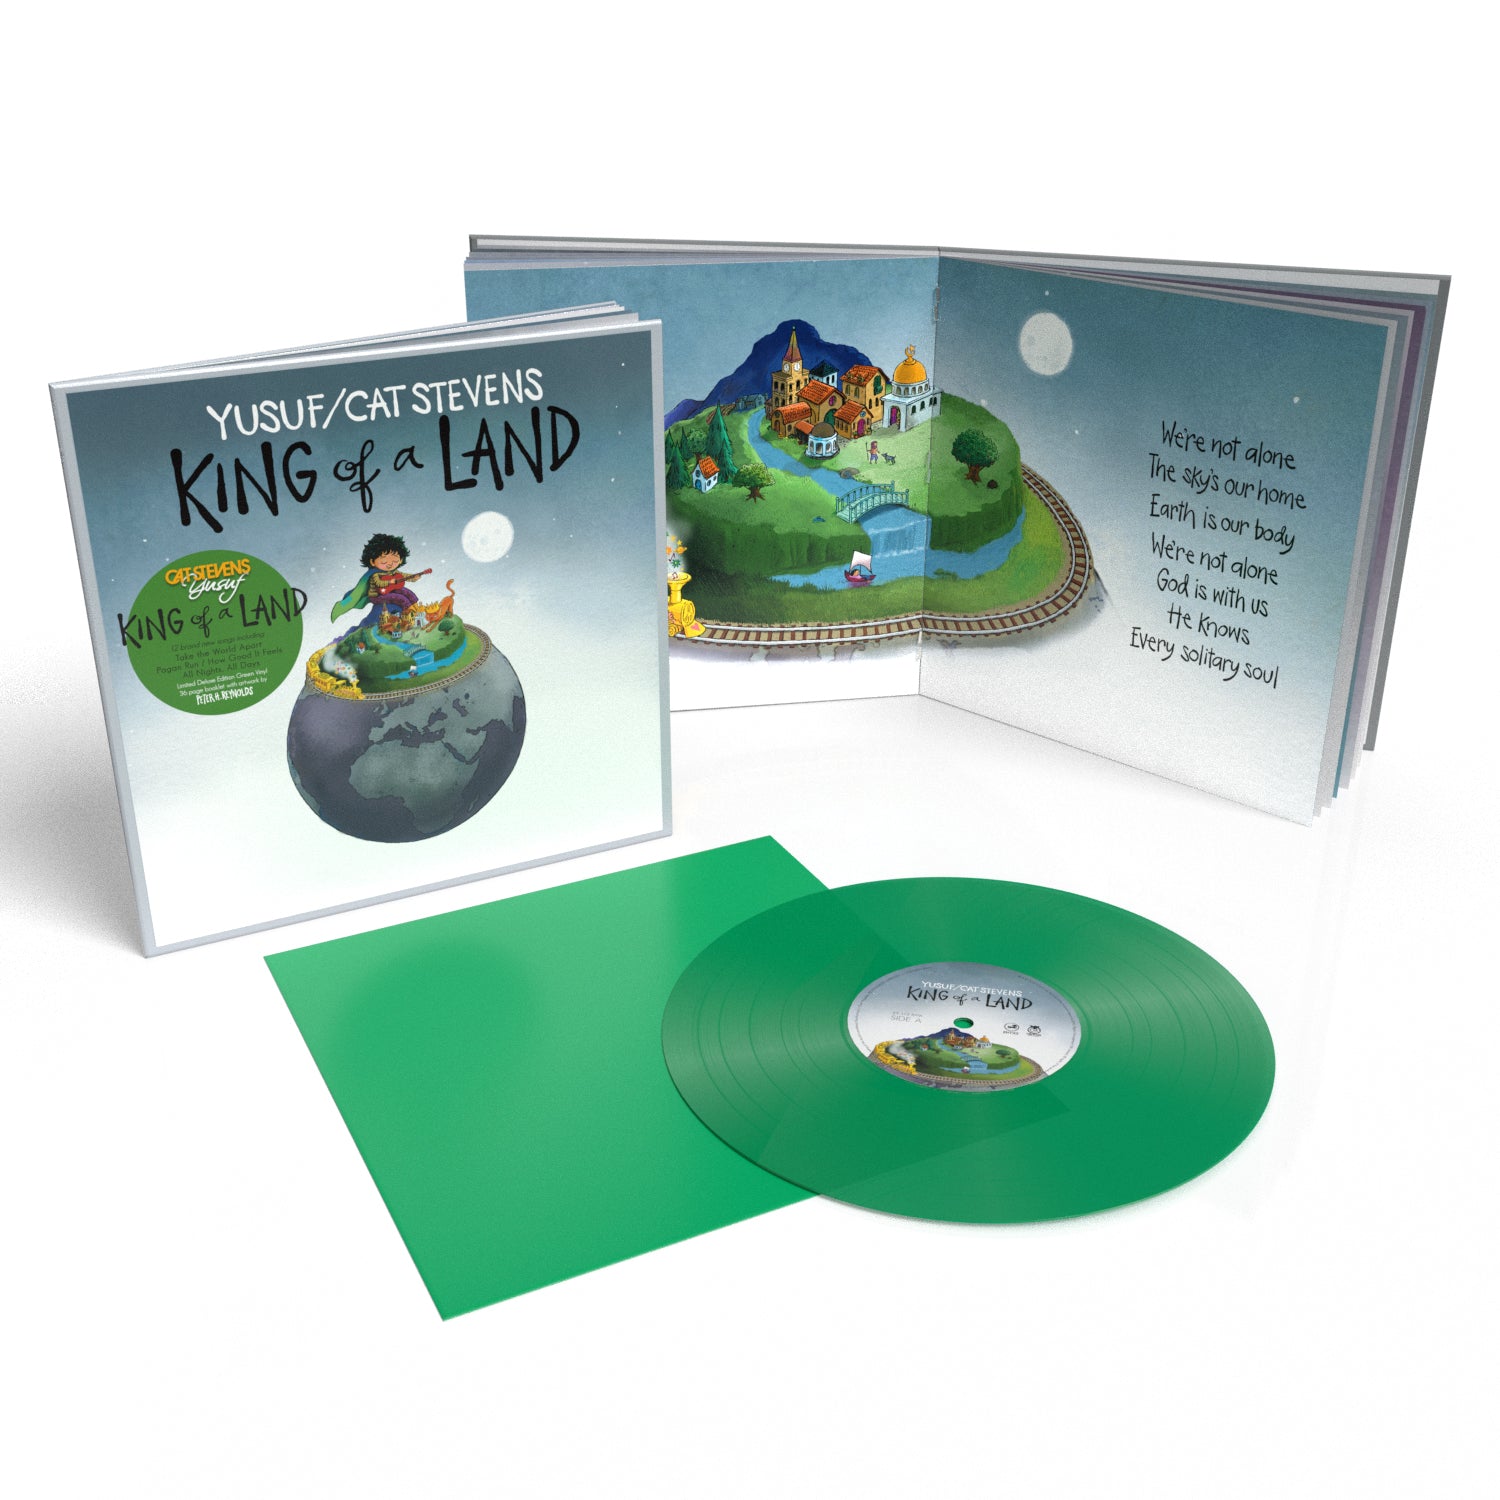 Yusef / Cat Stevens - .King of a Land: Limited Edition Green Vinyl LP + 36-Page Booklet